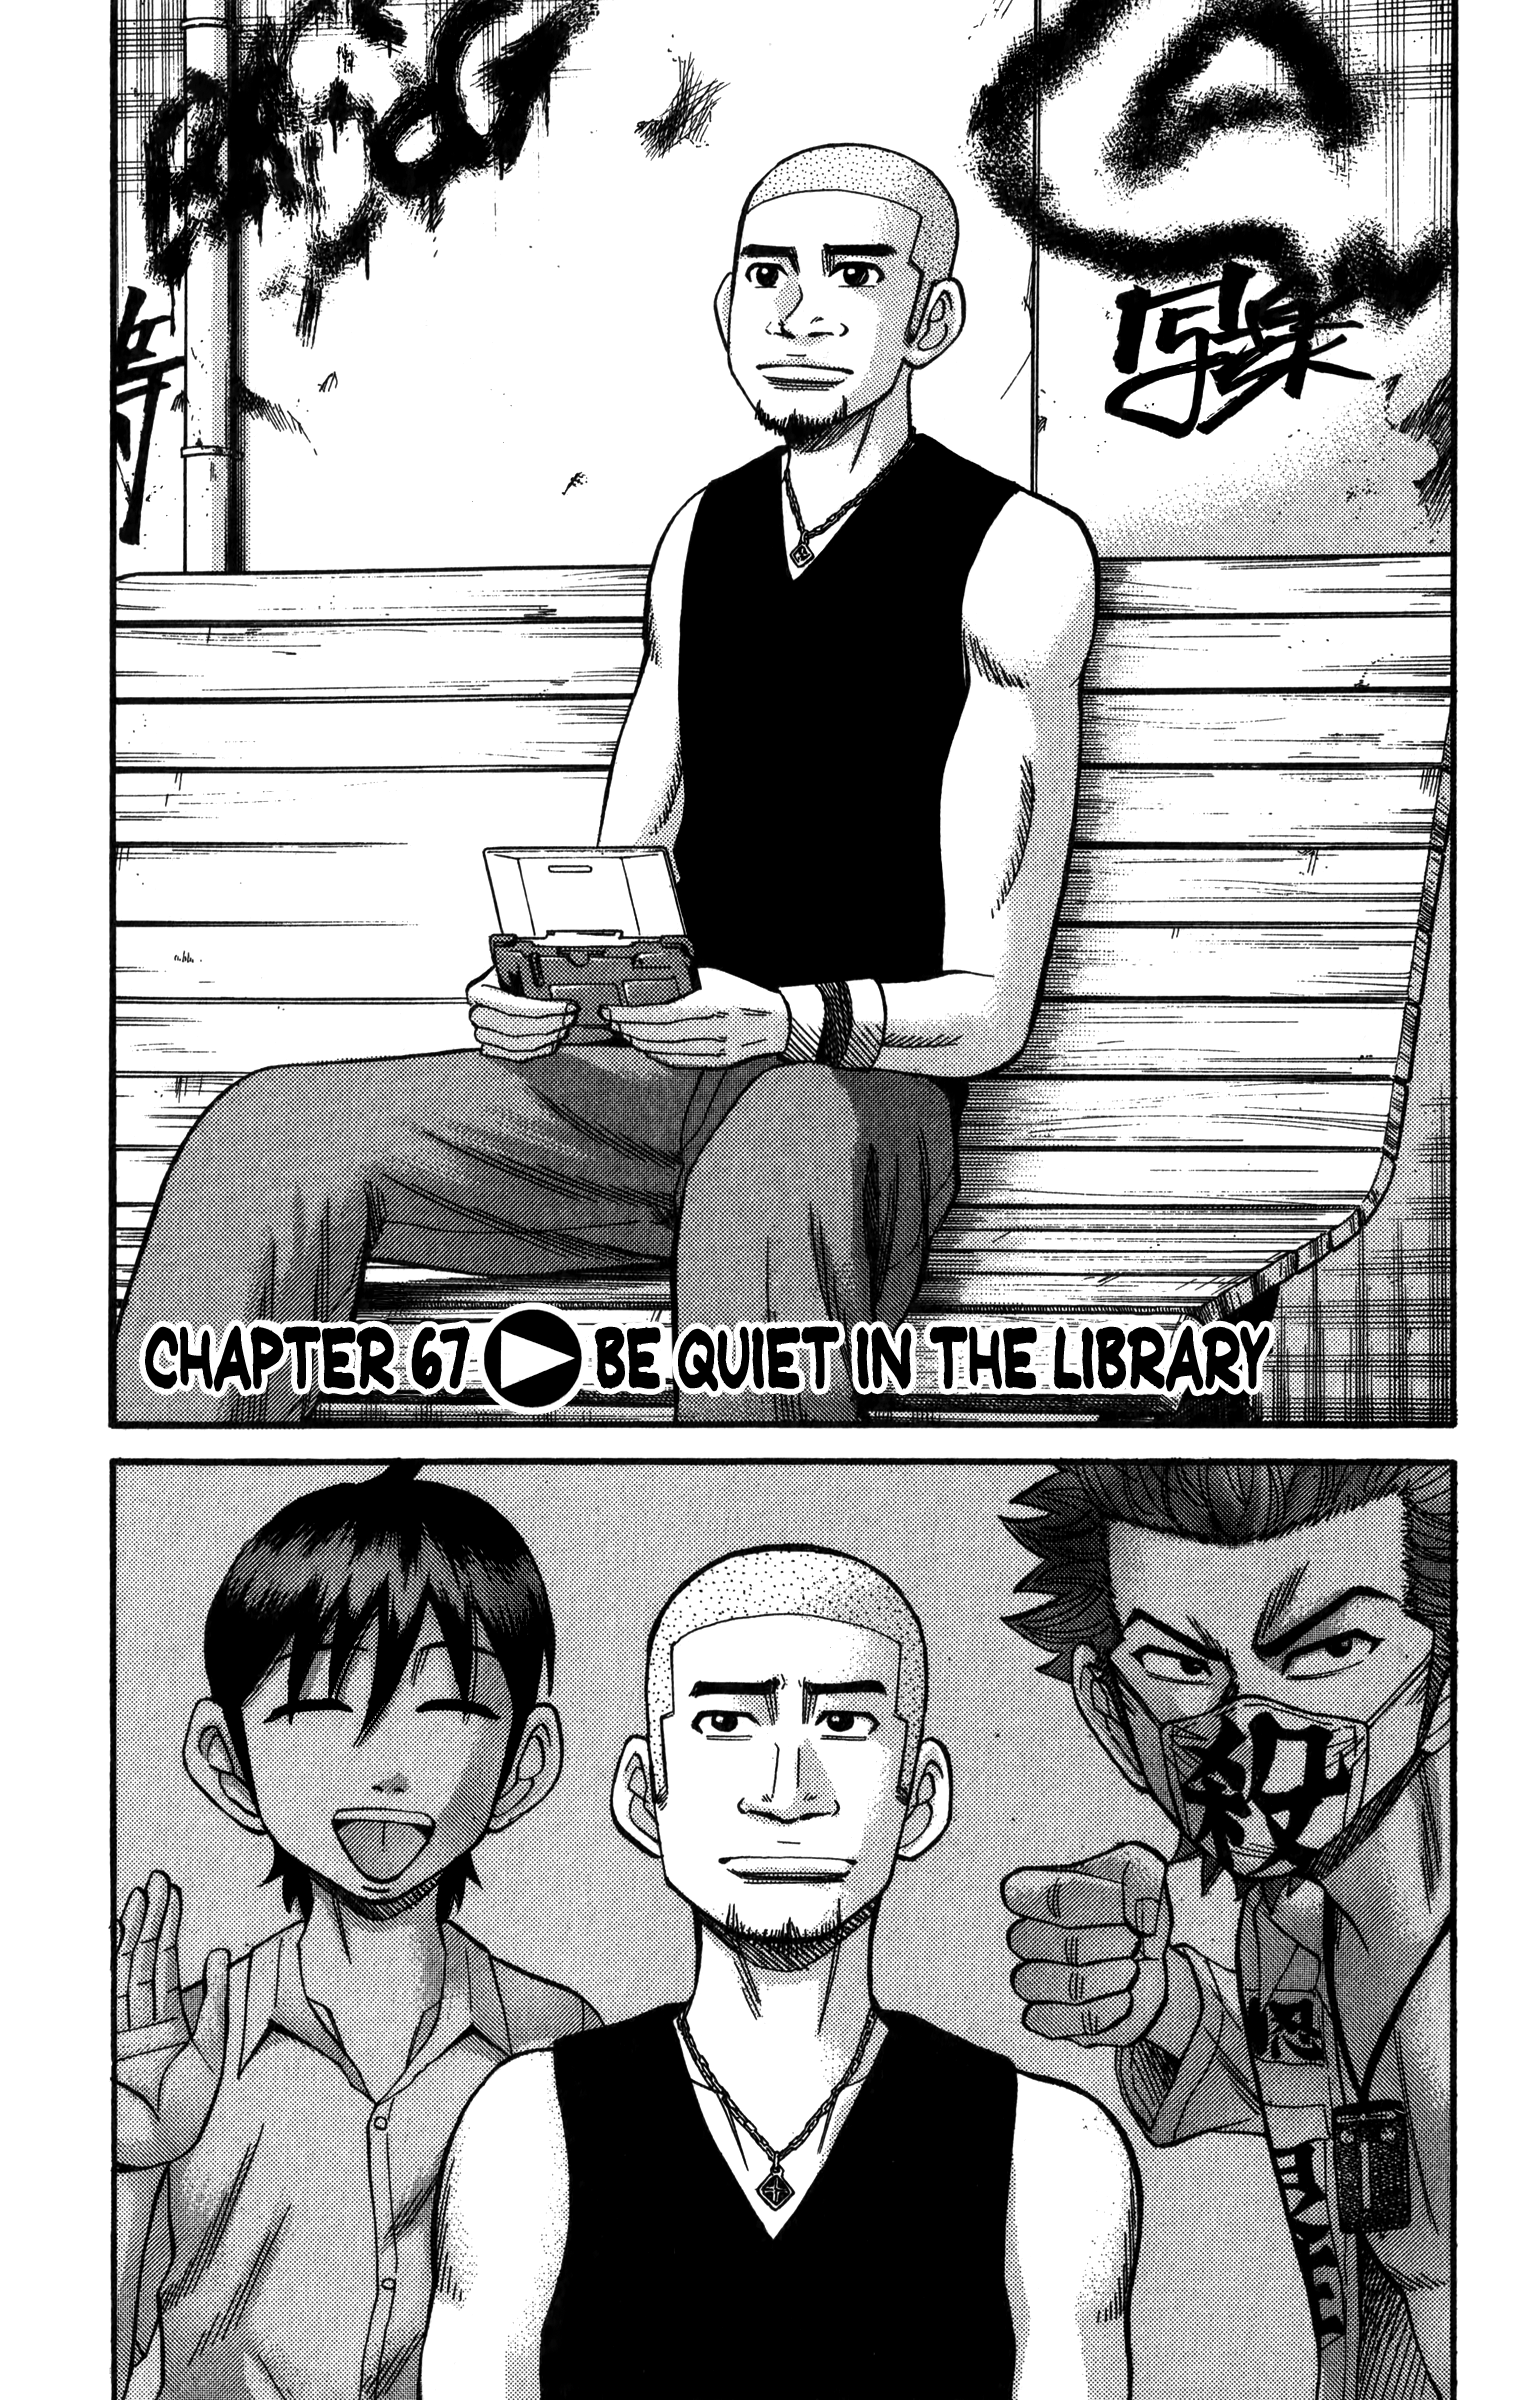 Nanba Mg5 Vol.8 Chapter 67: Be Quiet In The Library - Picture 1